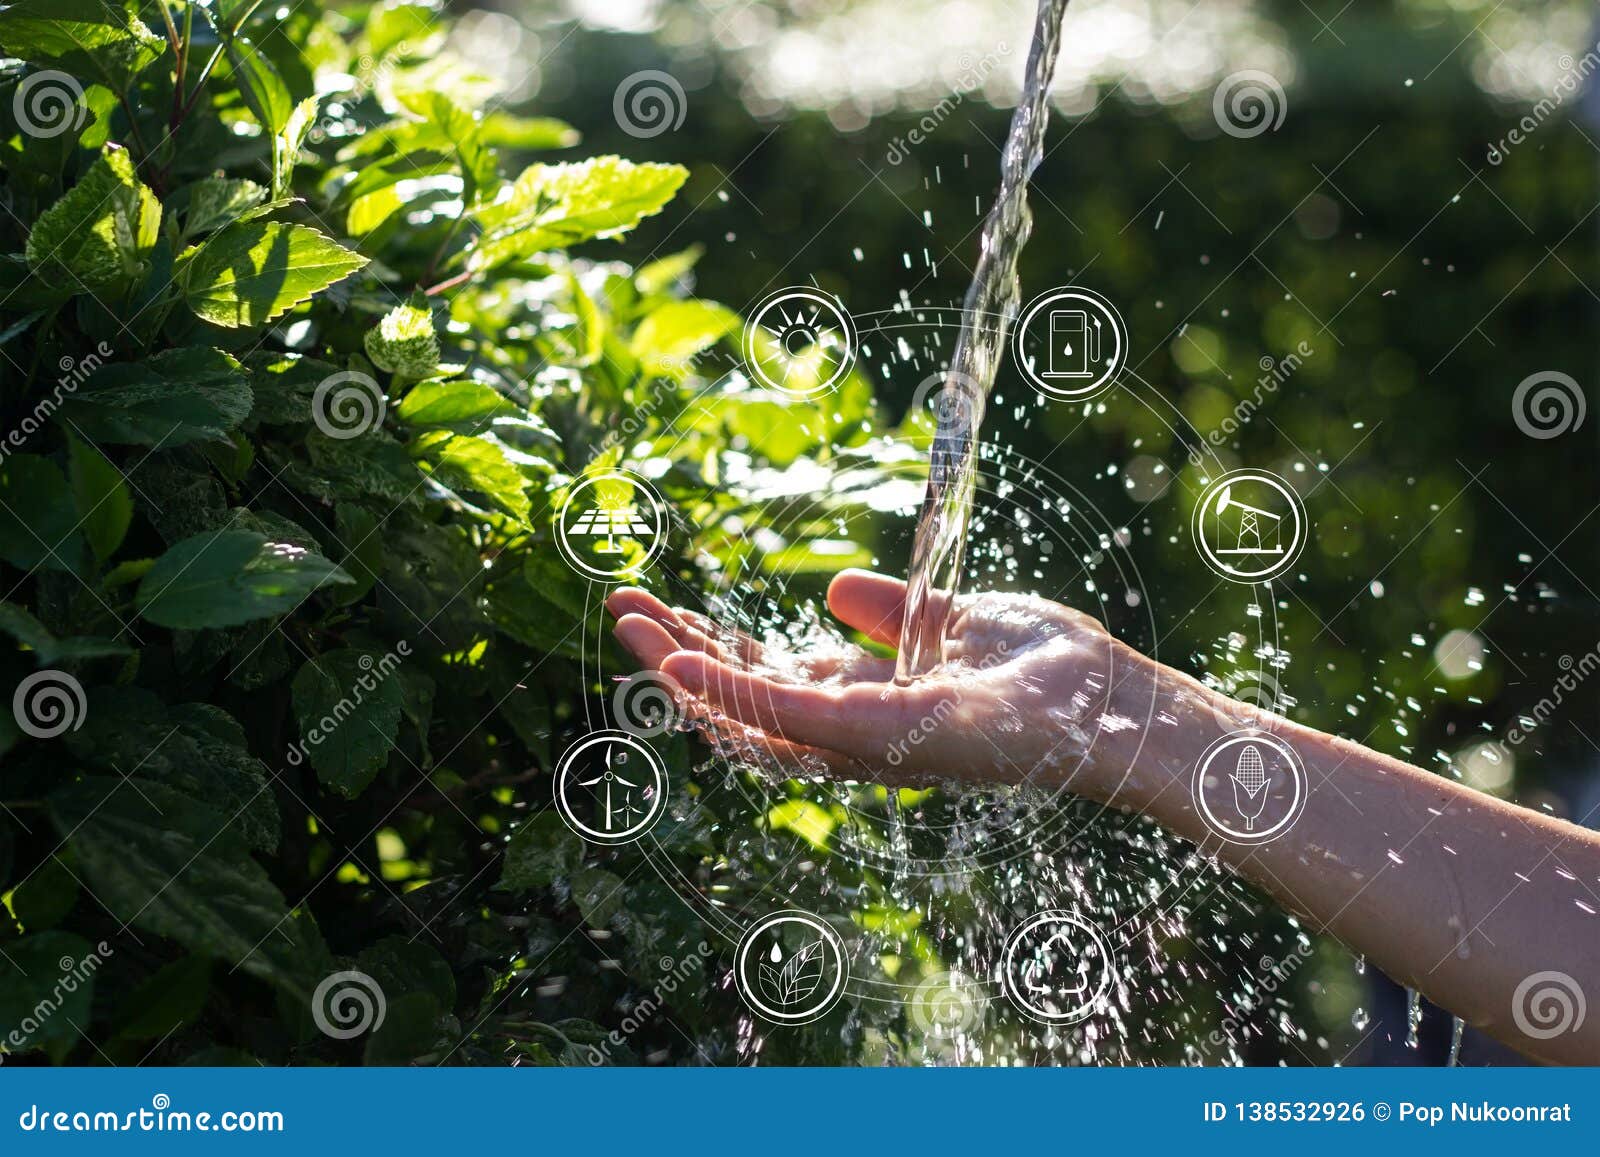 water pouring in woman hand with icons energy sources for renewable, sustainable development. ecology